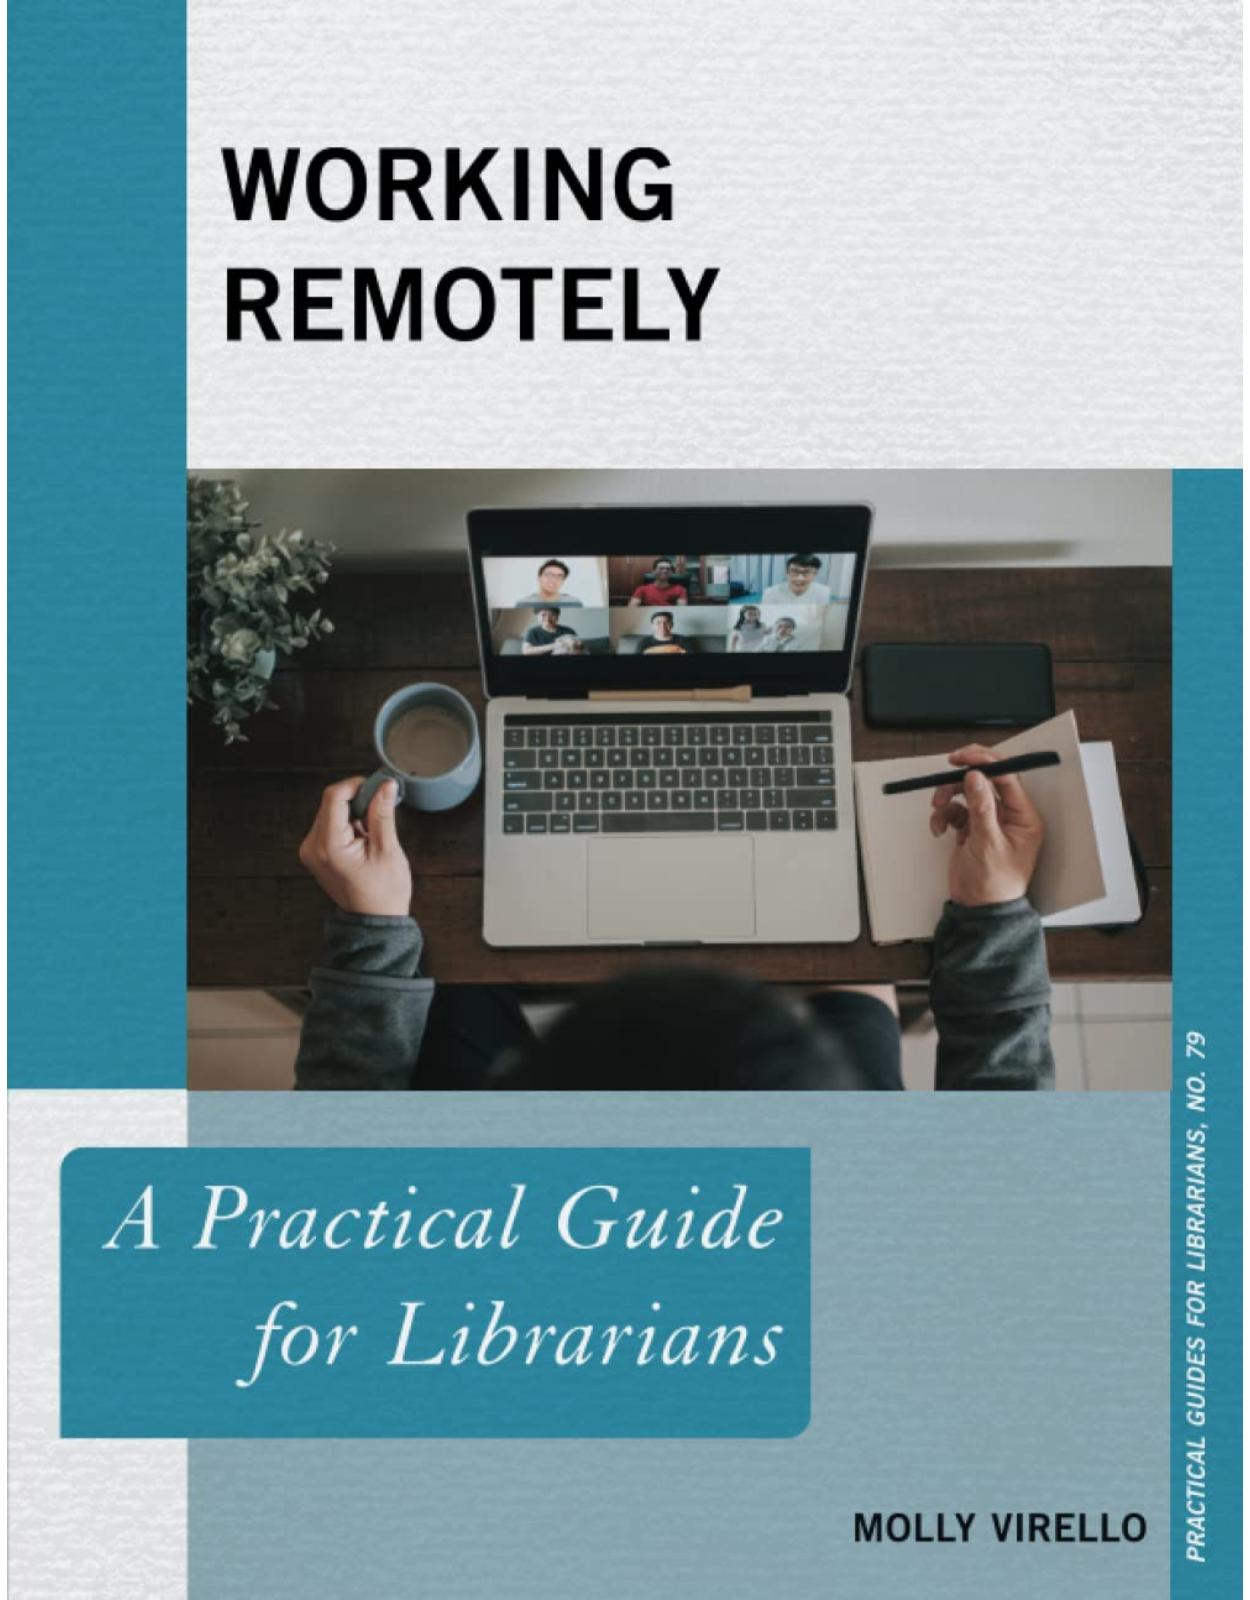 Working Remotely: A Practical Guide for Librarians: 79